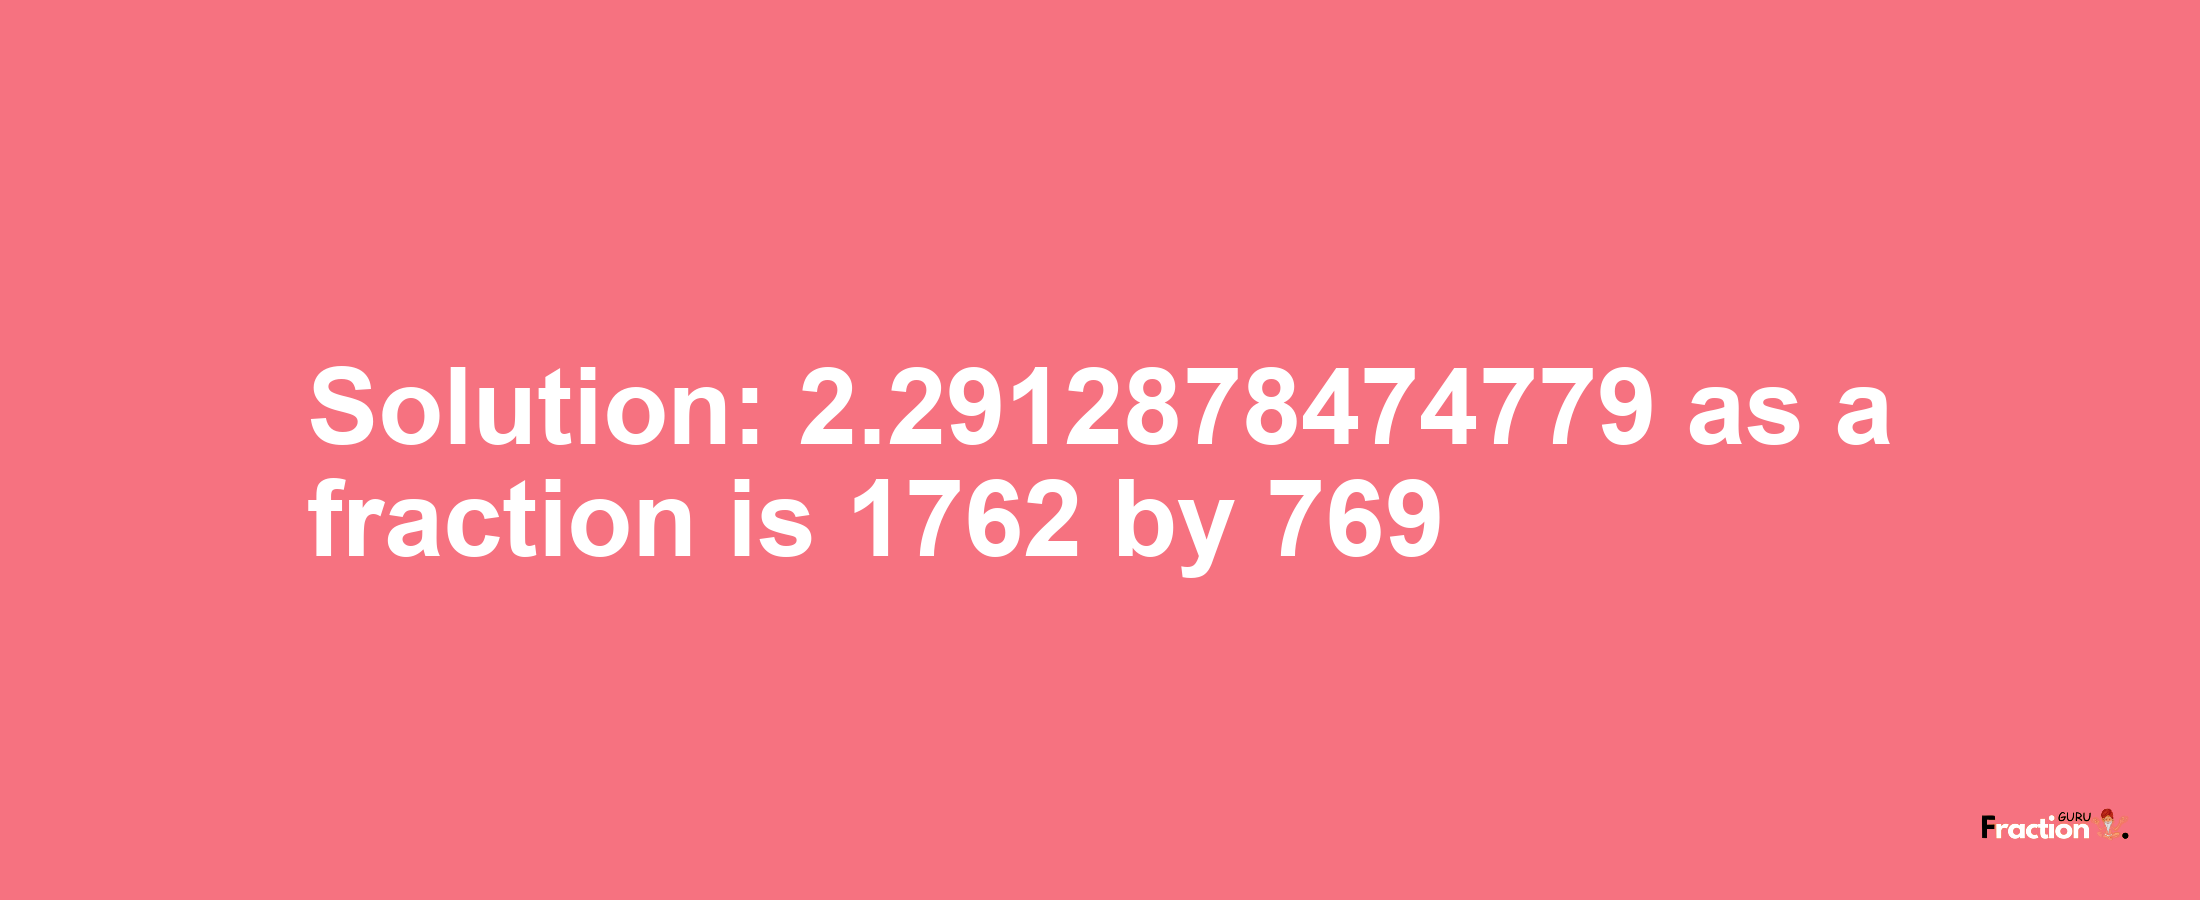 Solution:2.2912878474779 as a fraction is 1762/769